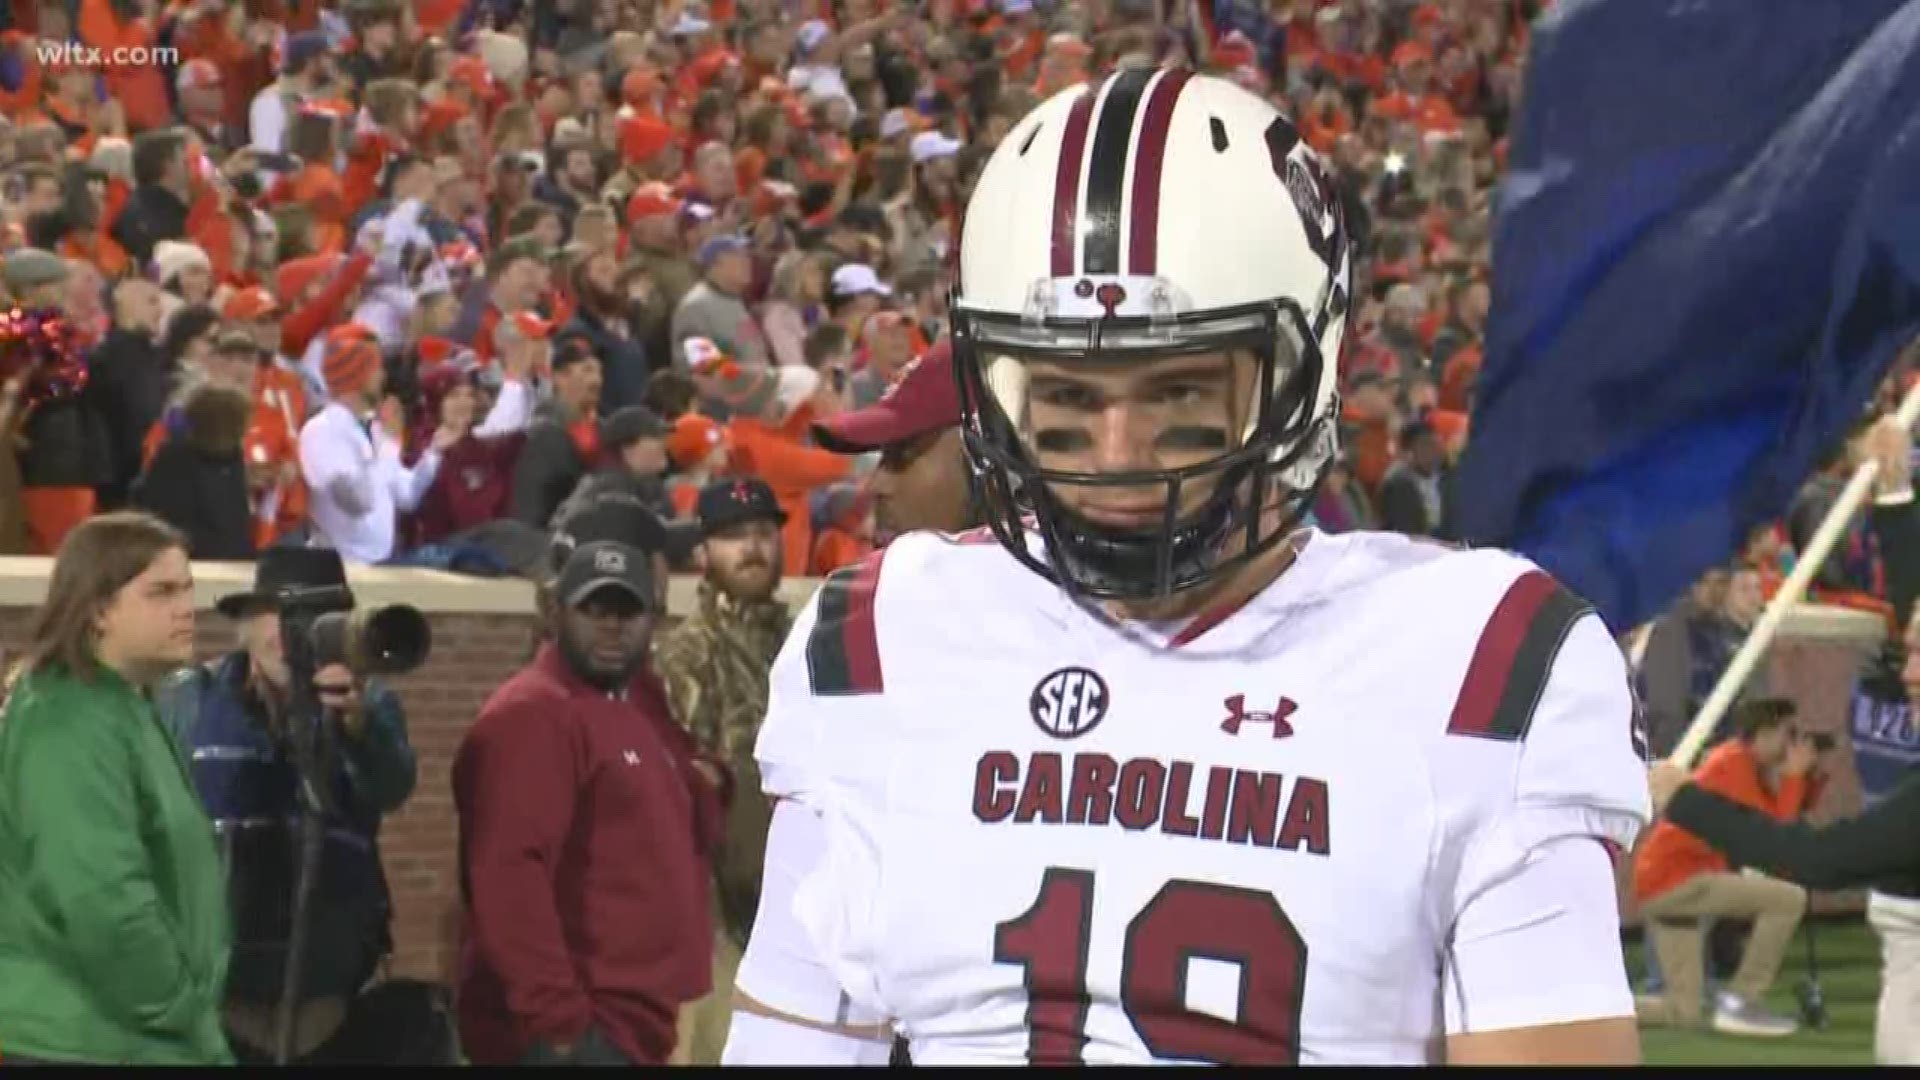 Jake Bentley announces he will transfer to another school for his final season.